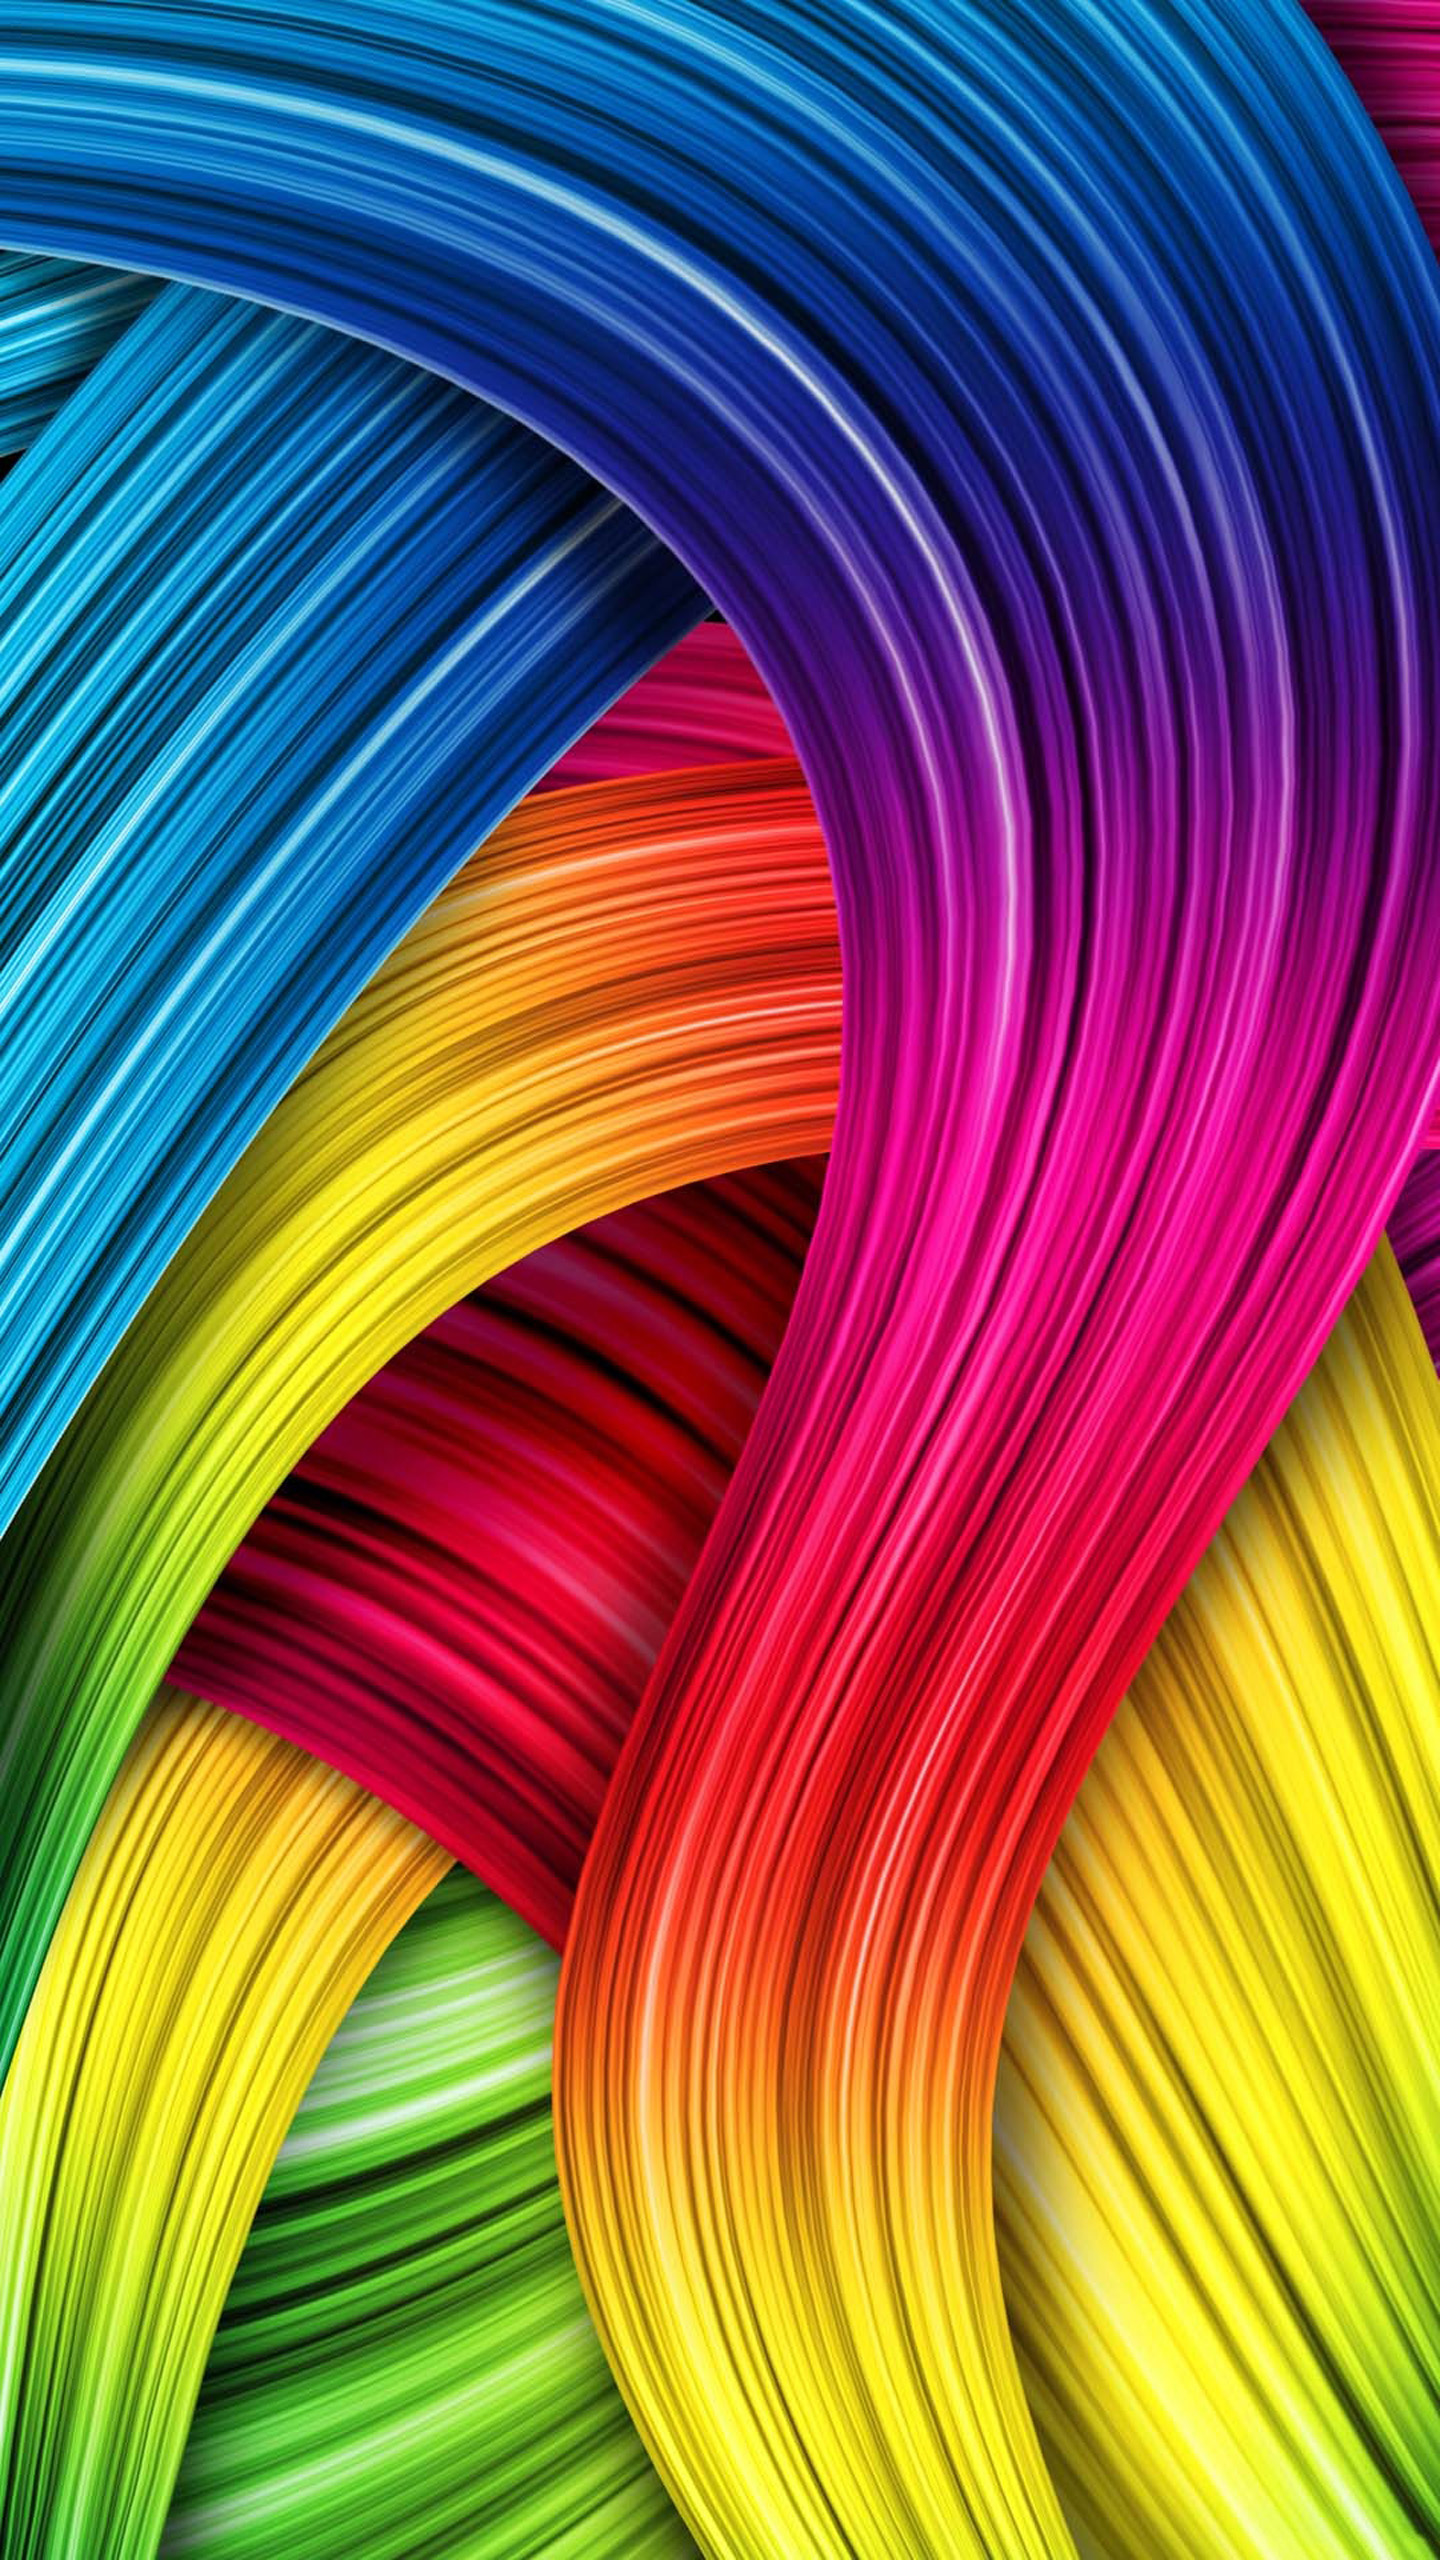 Galaxy note 4 official wallpaper 11